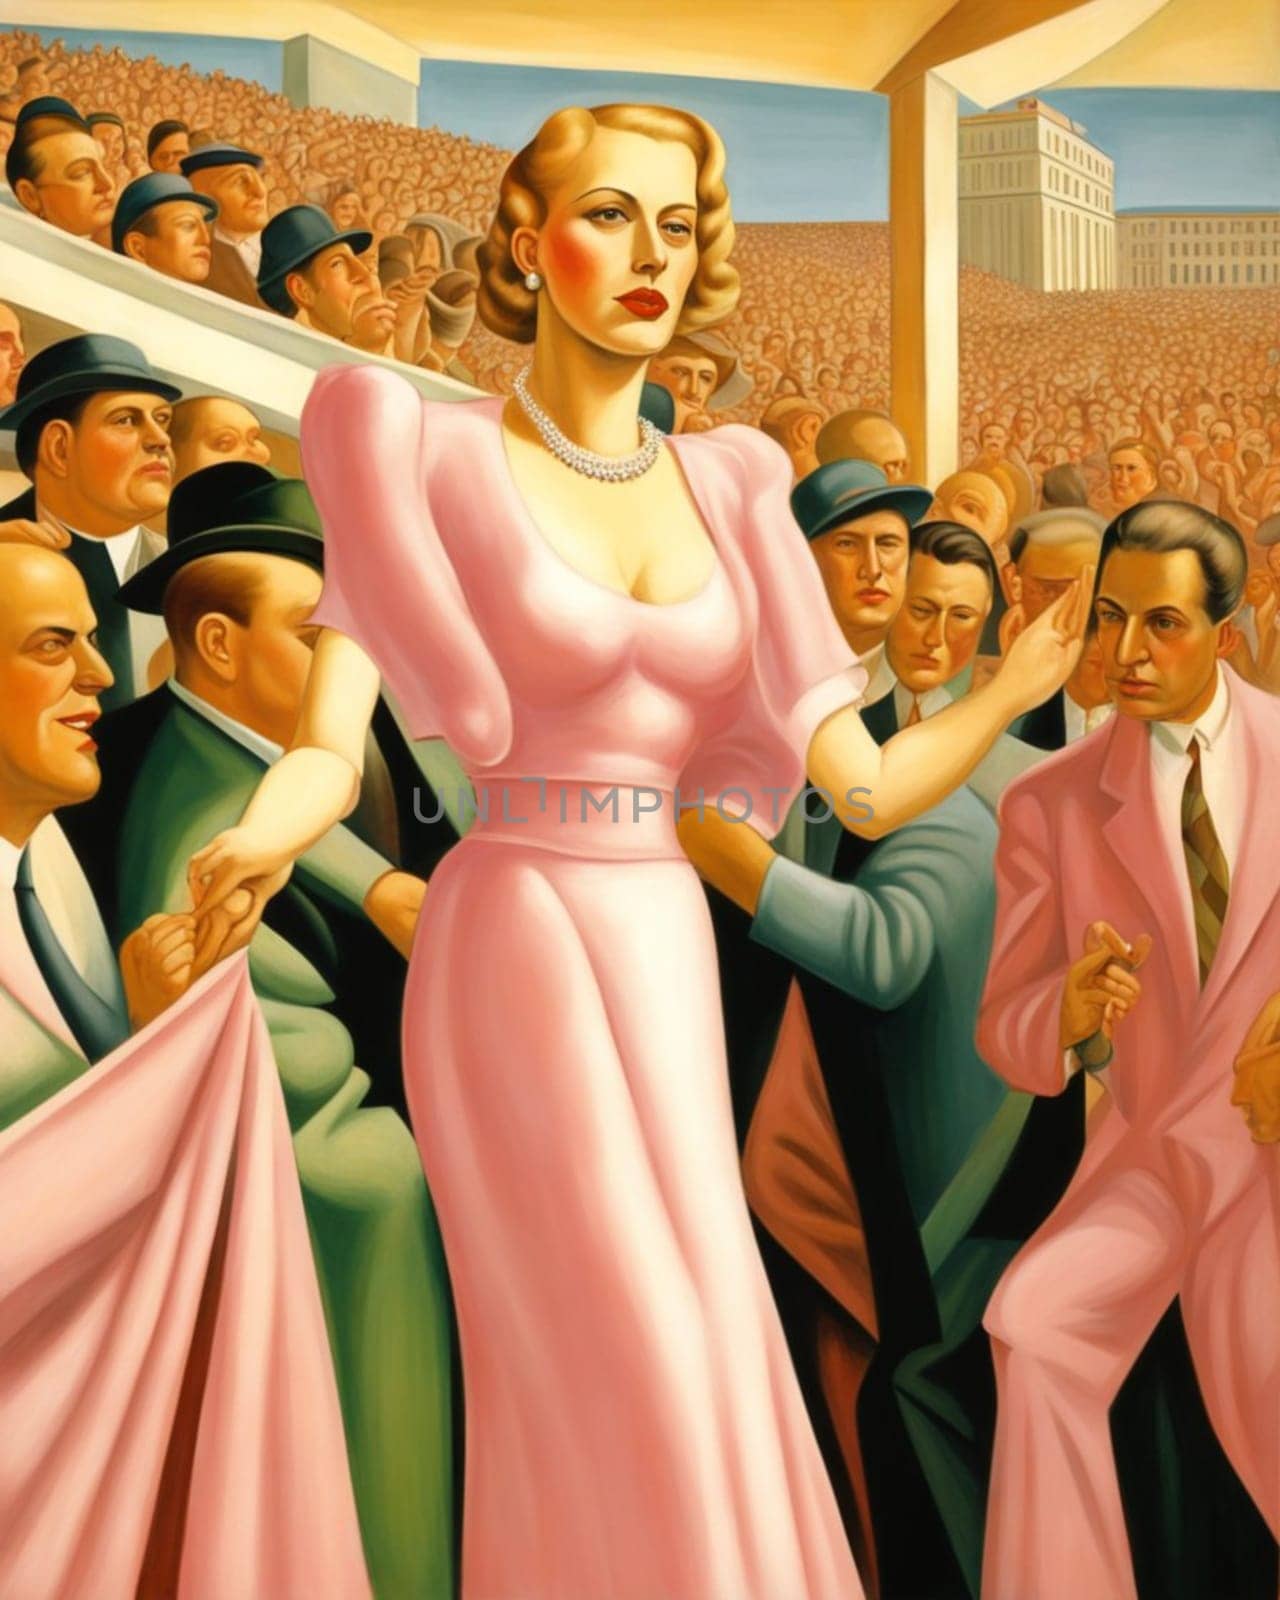 female politic short hairstyle, blond thin energetic, president, art deco , pitch speak shout crowd by verbano